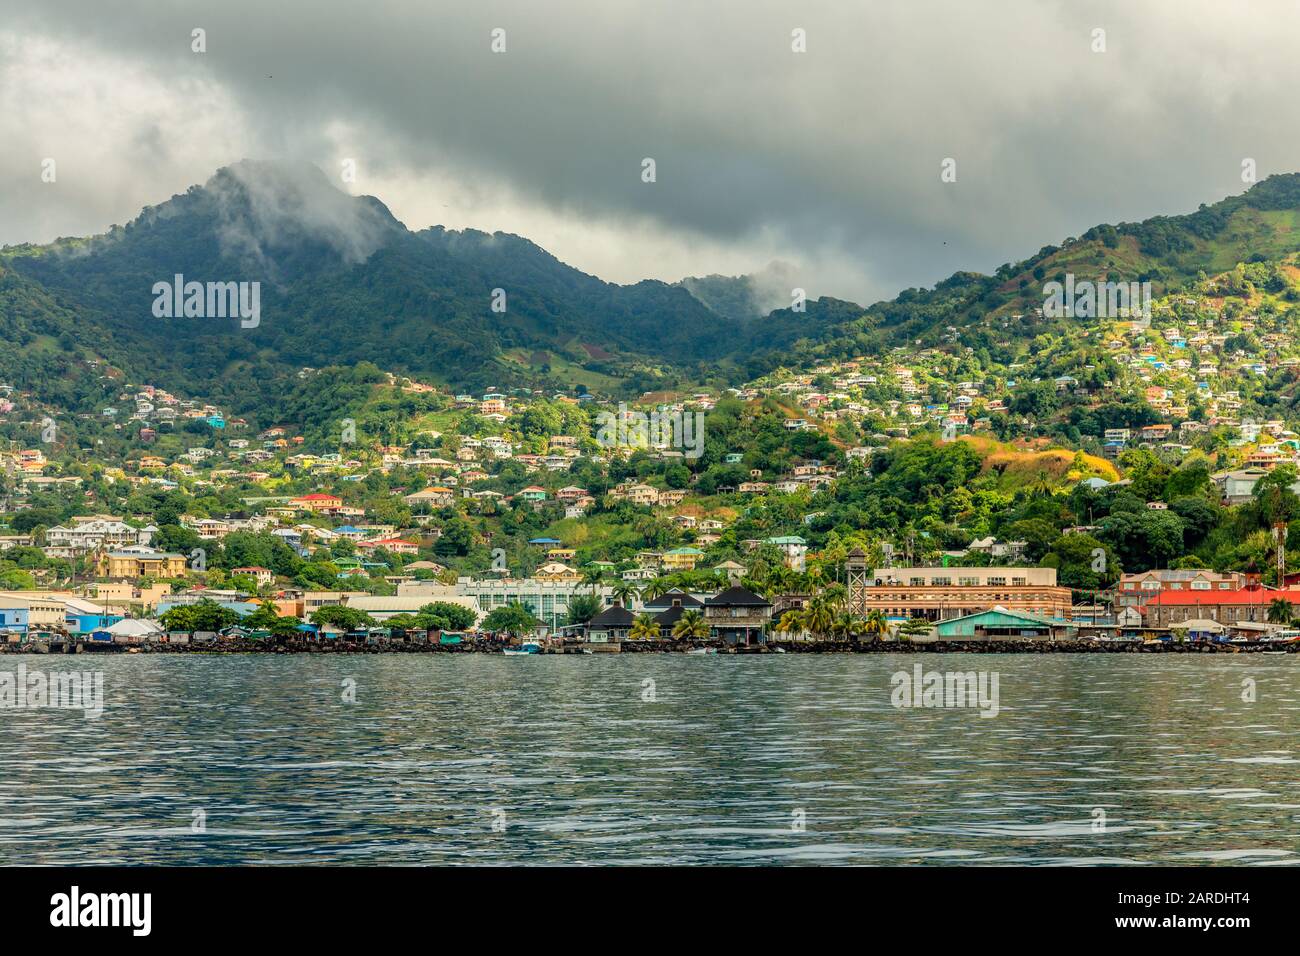 Coastline view with lots of living houses on the hill, Kingstown, Saint Vincent and the Grenadines Stock Photo